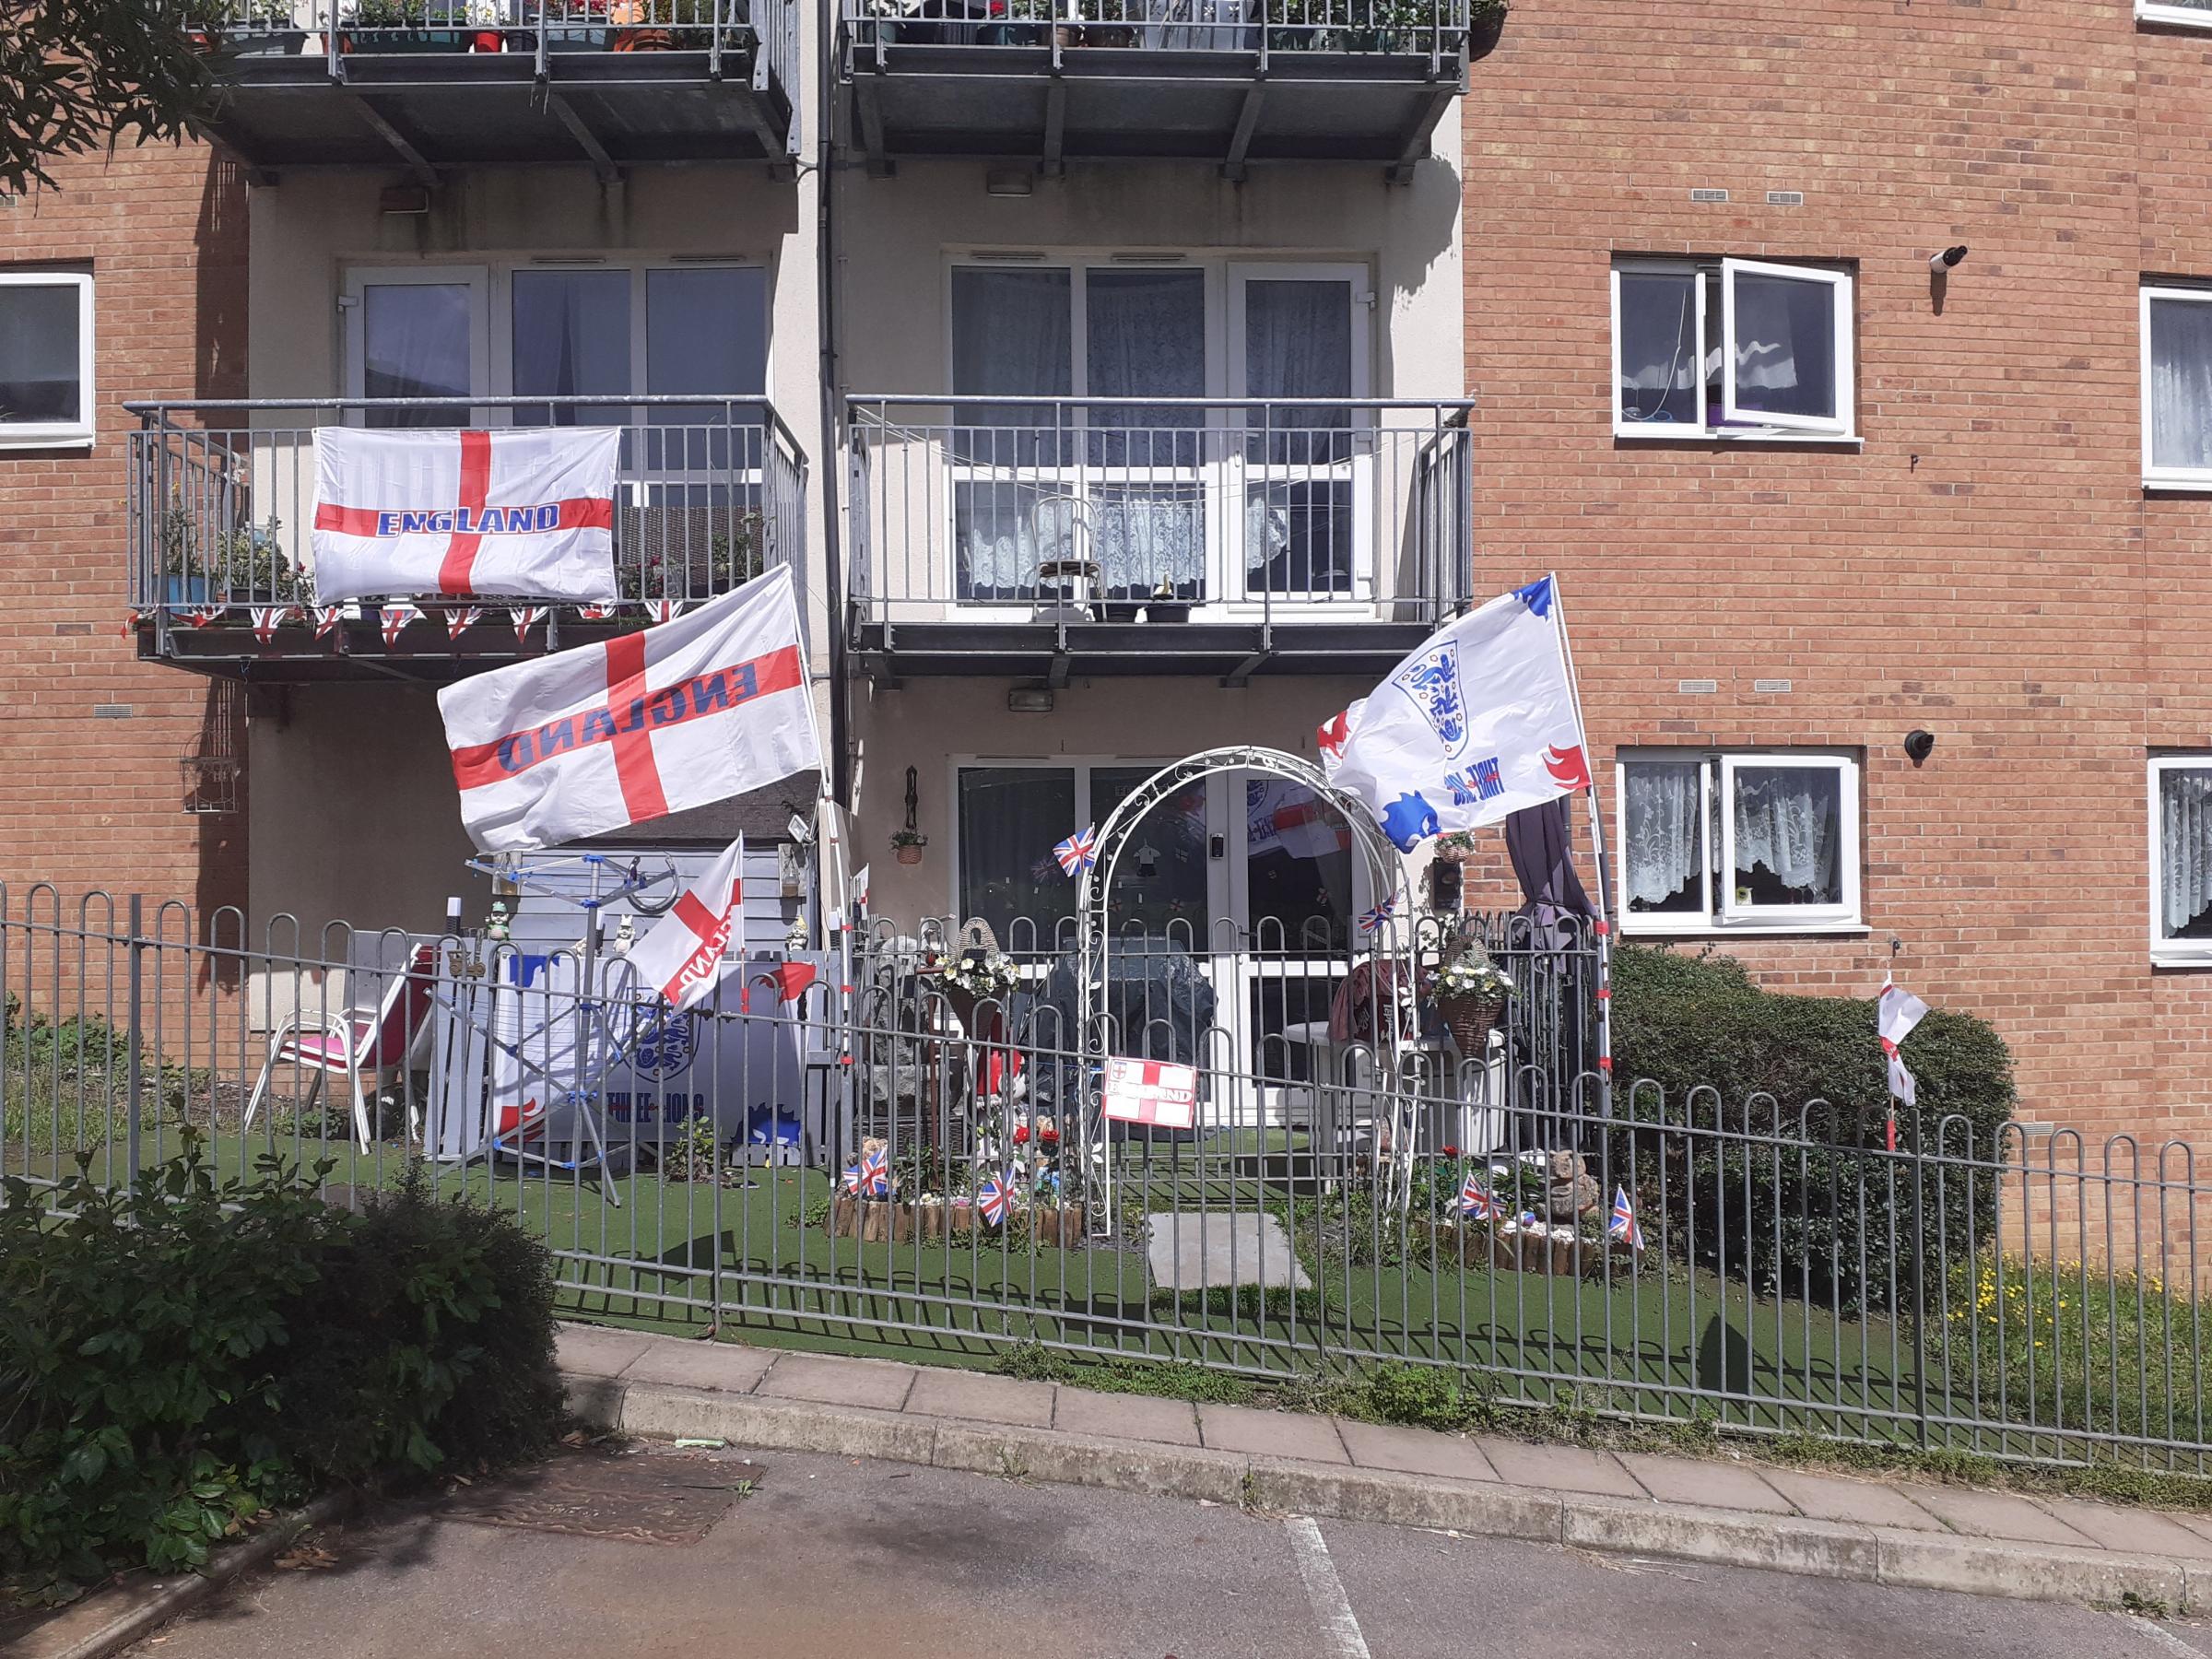 This sent in from Lisa Holland reads: “We have decorated our flats up on Windrush drive (Micklefield), weve had them up since their first match!”